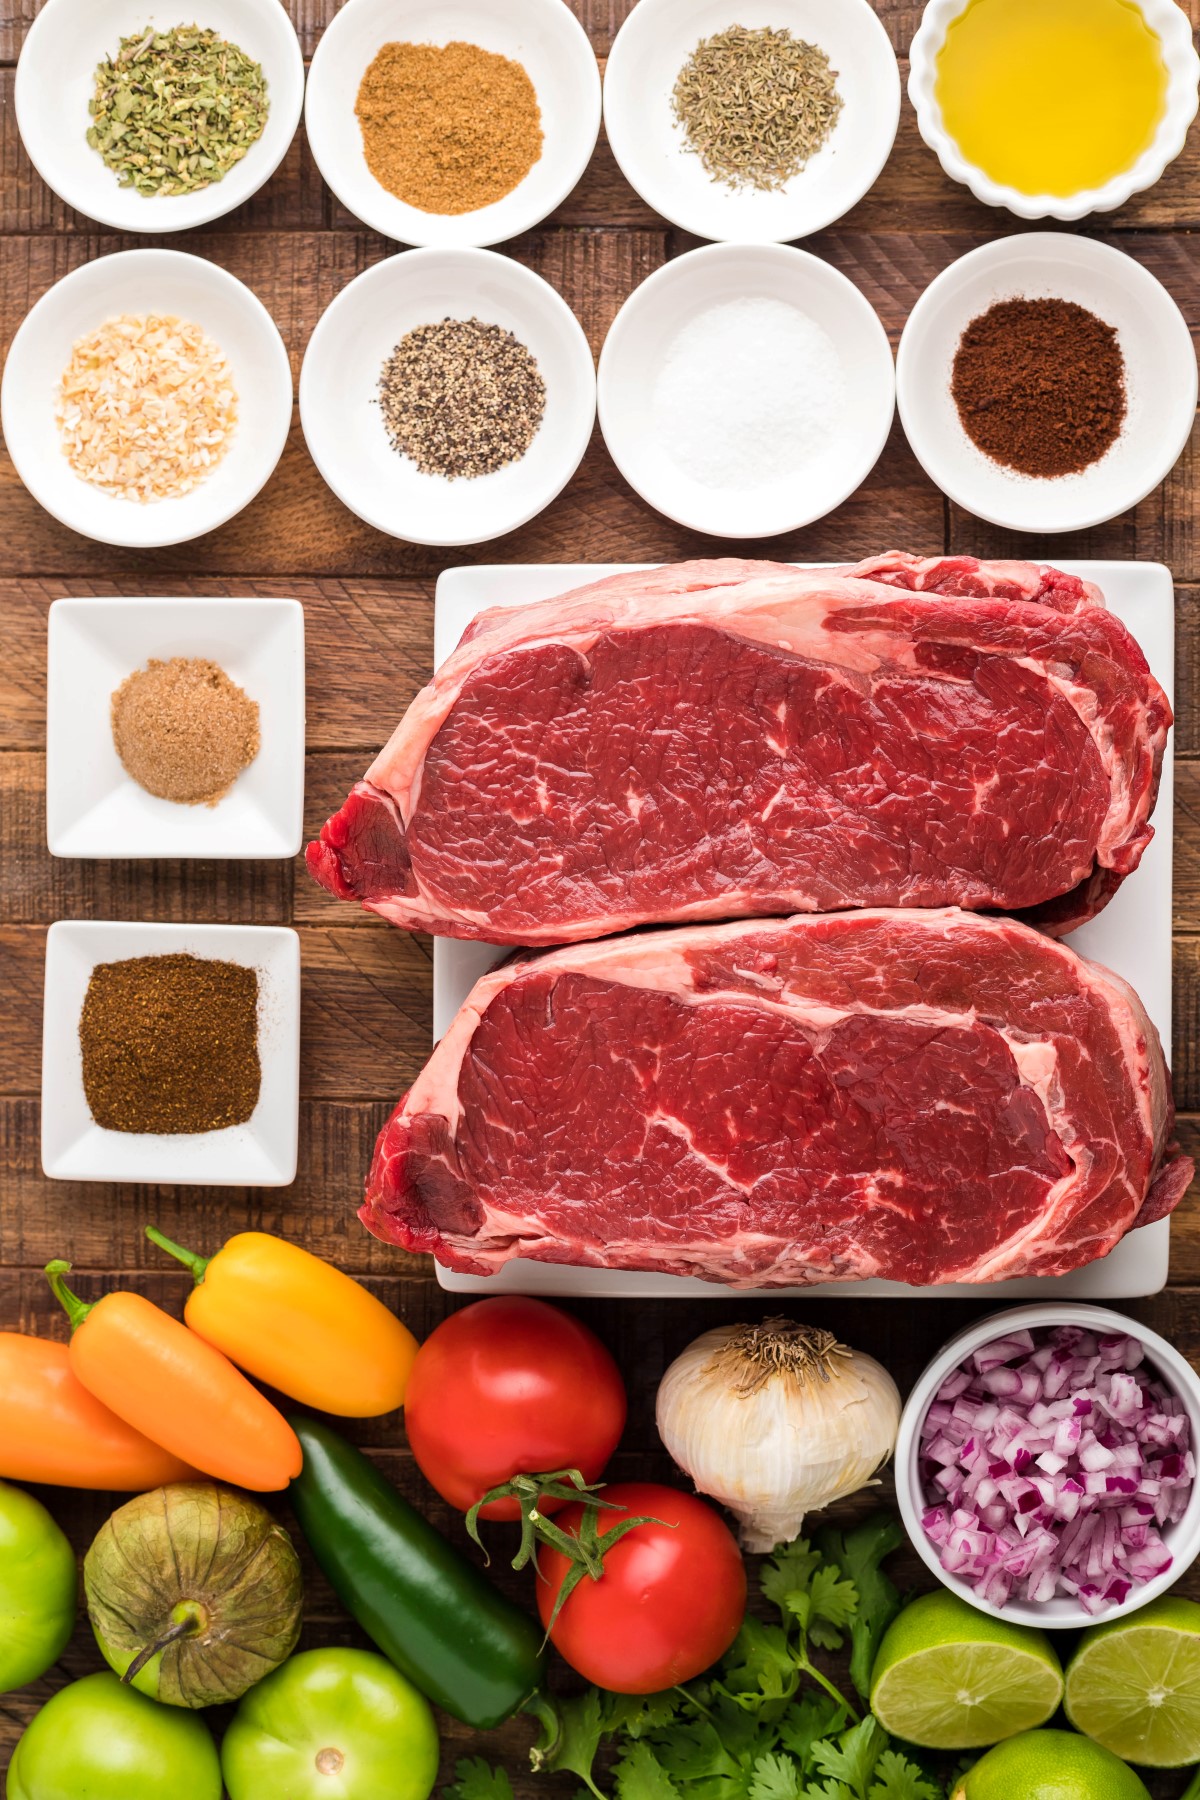 All the ingredients to make this amazing Ancho Chili Ribeye steak recipe with salsa.